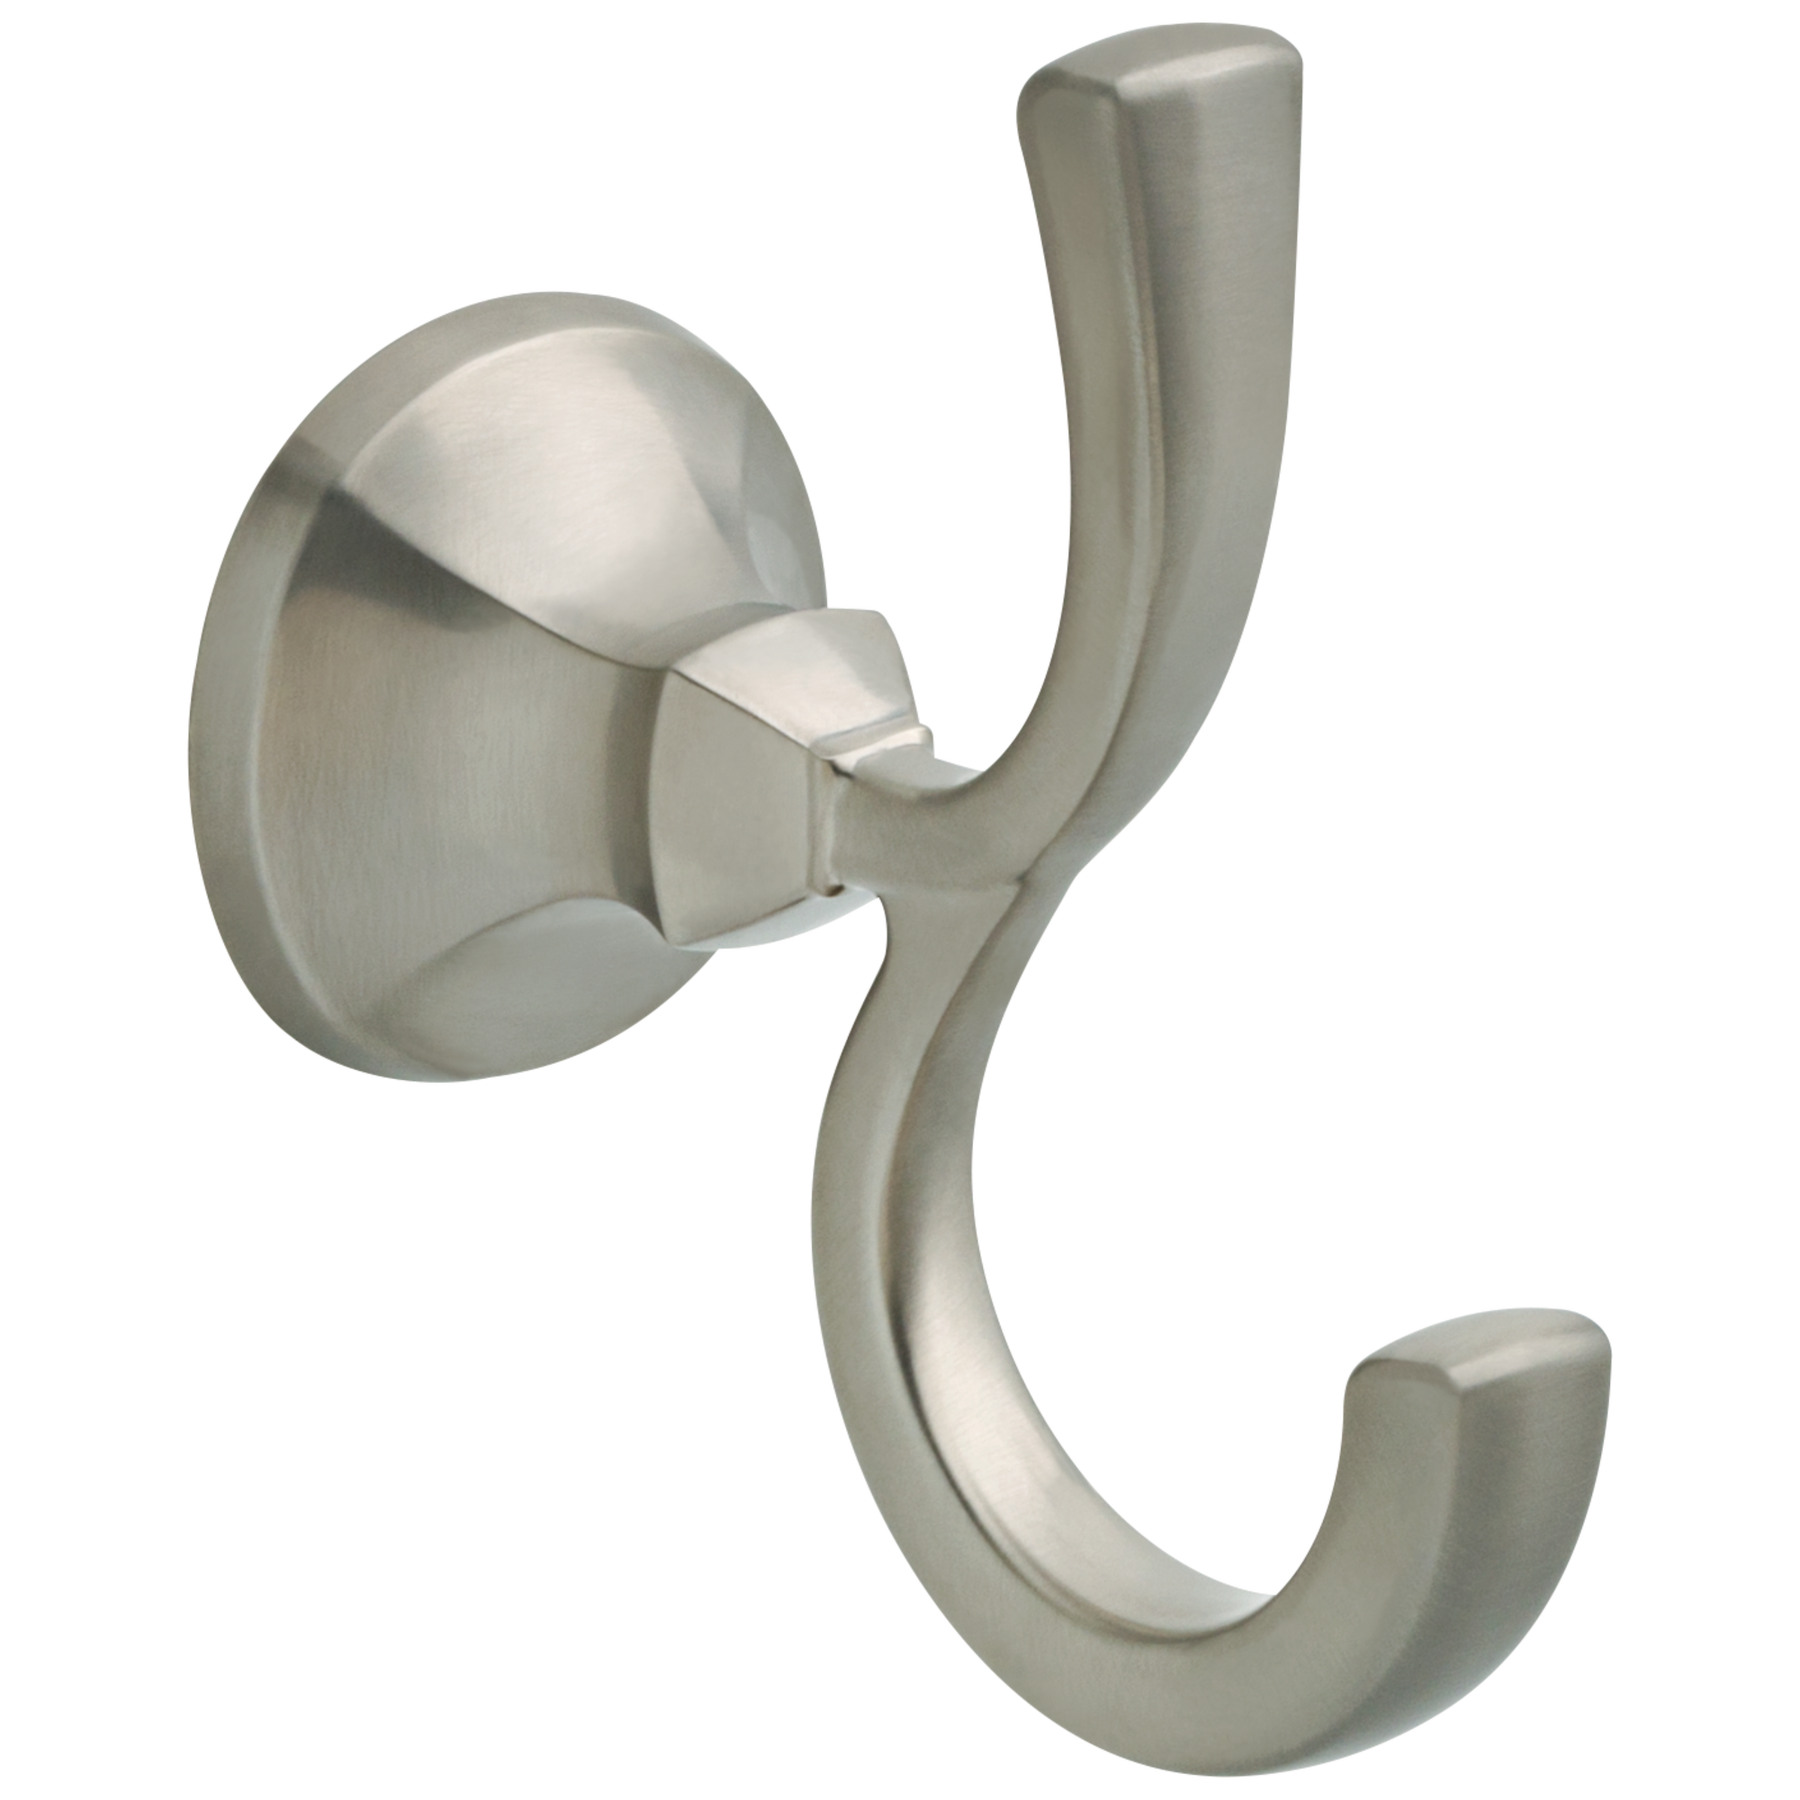 Robe Hook in Stainless 76435-SS